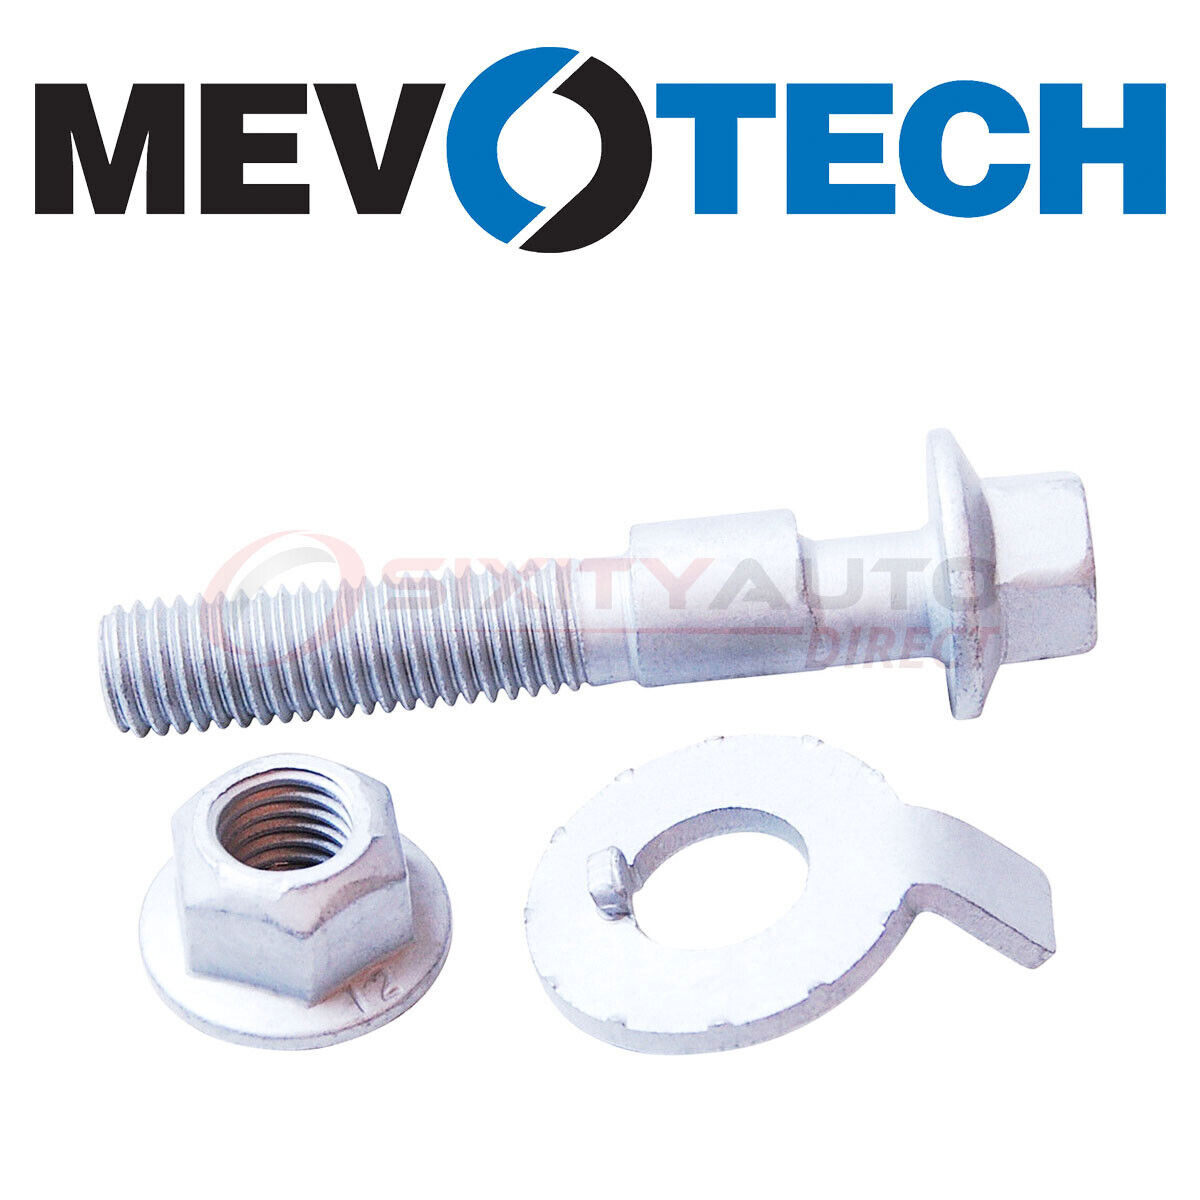 Mevotech Alignment Camber Kit for 1997 Saturn SW2 1.9L L4 - Wheels Tires xq